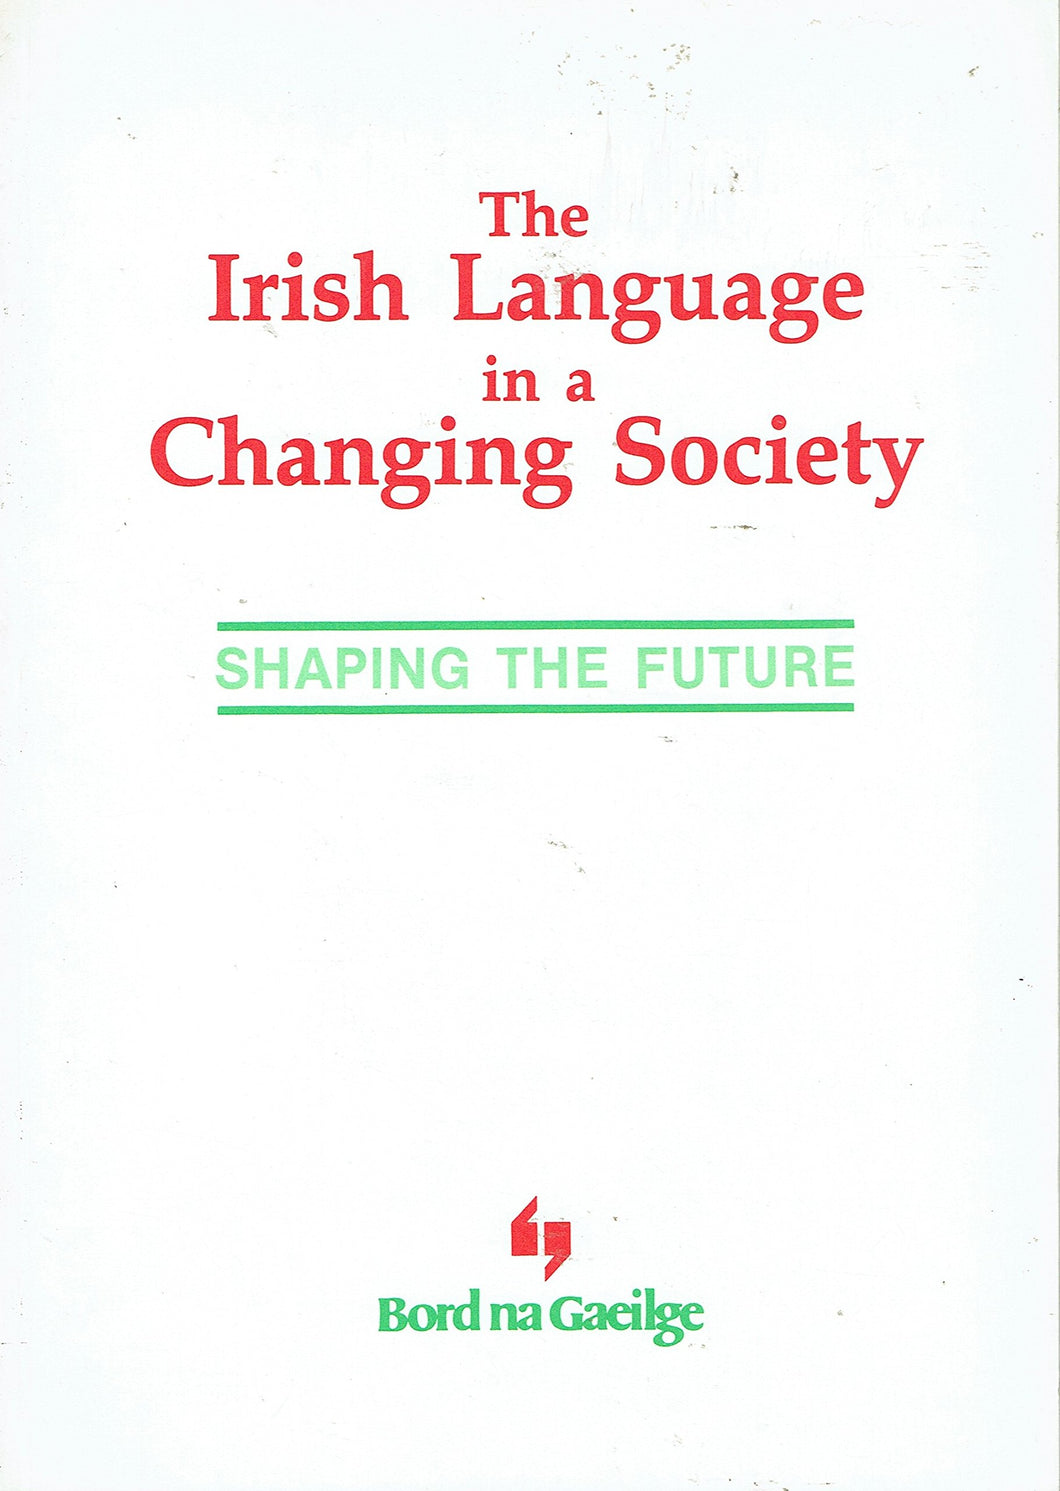 The Irish Language in a Changing Society: Shaping the Future